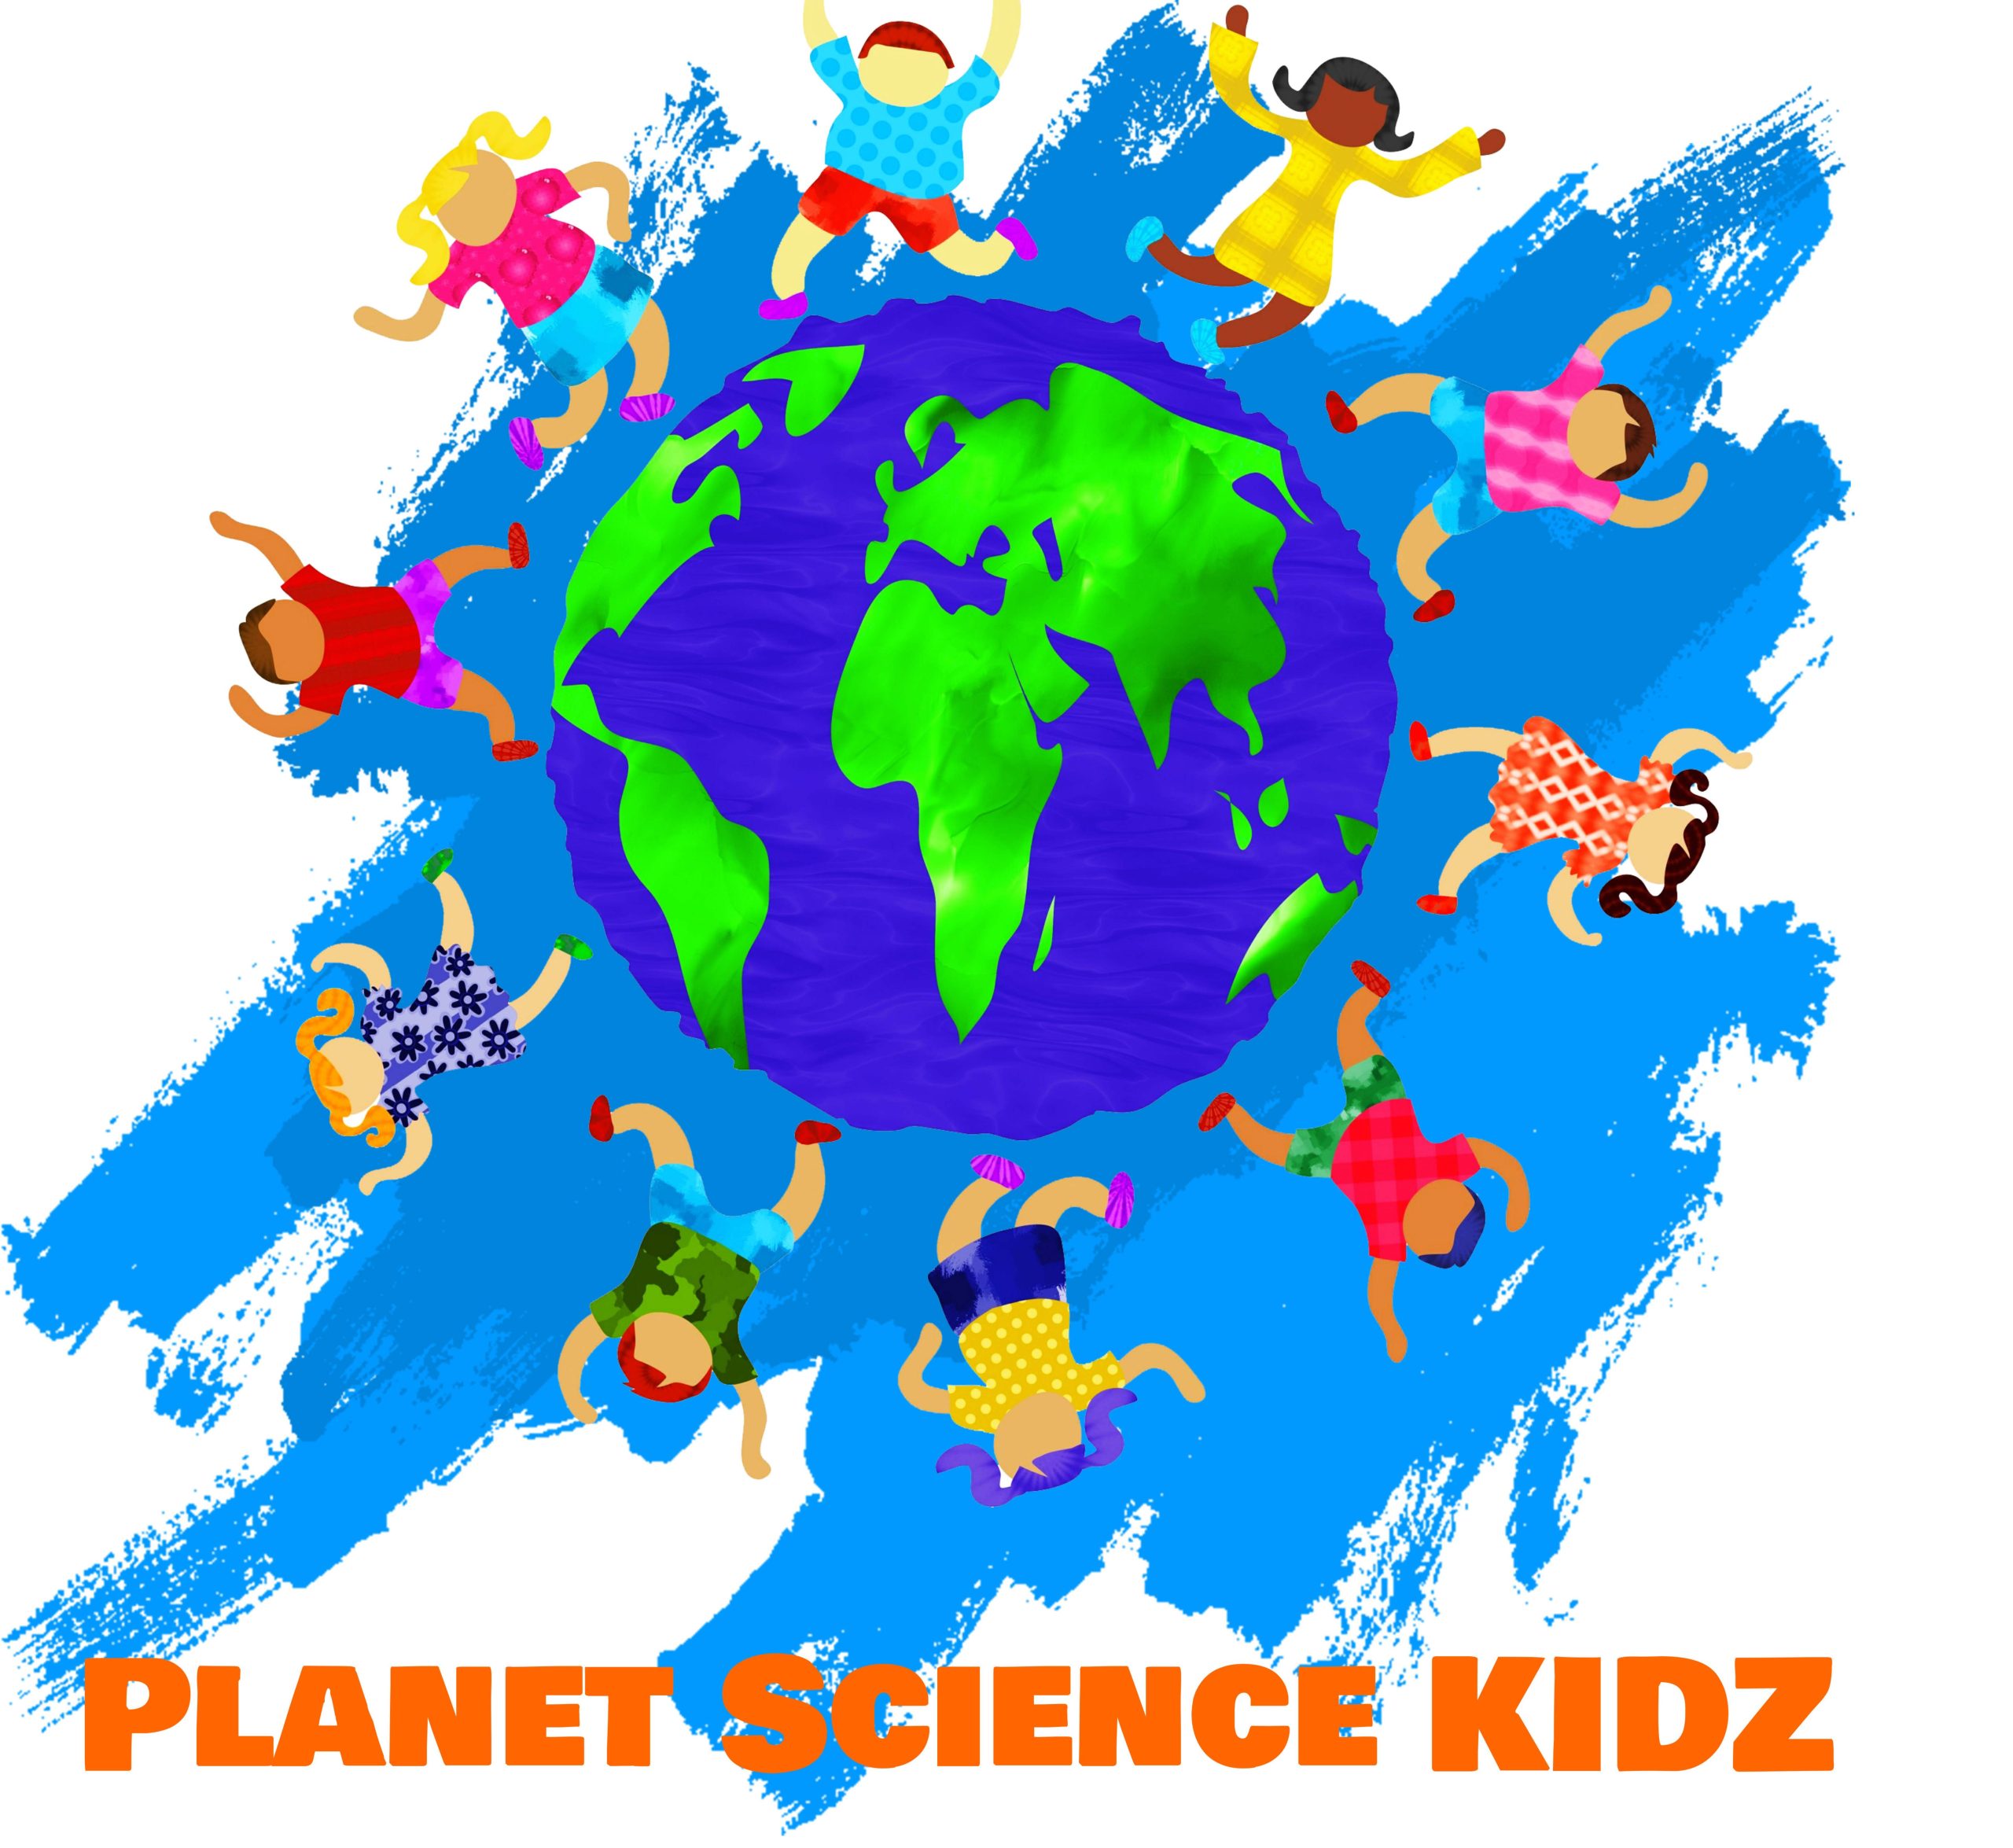 Planet science